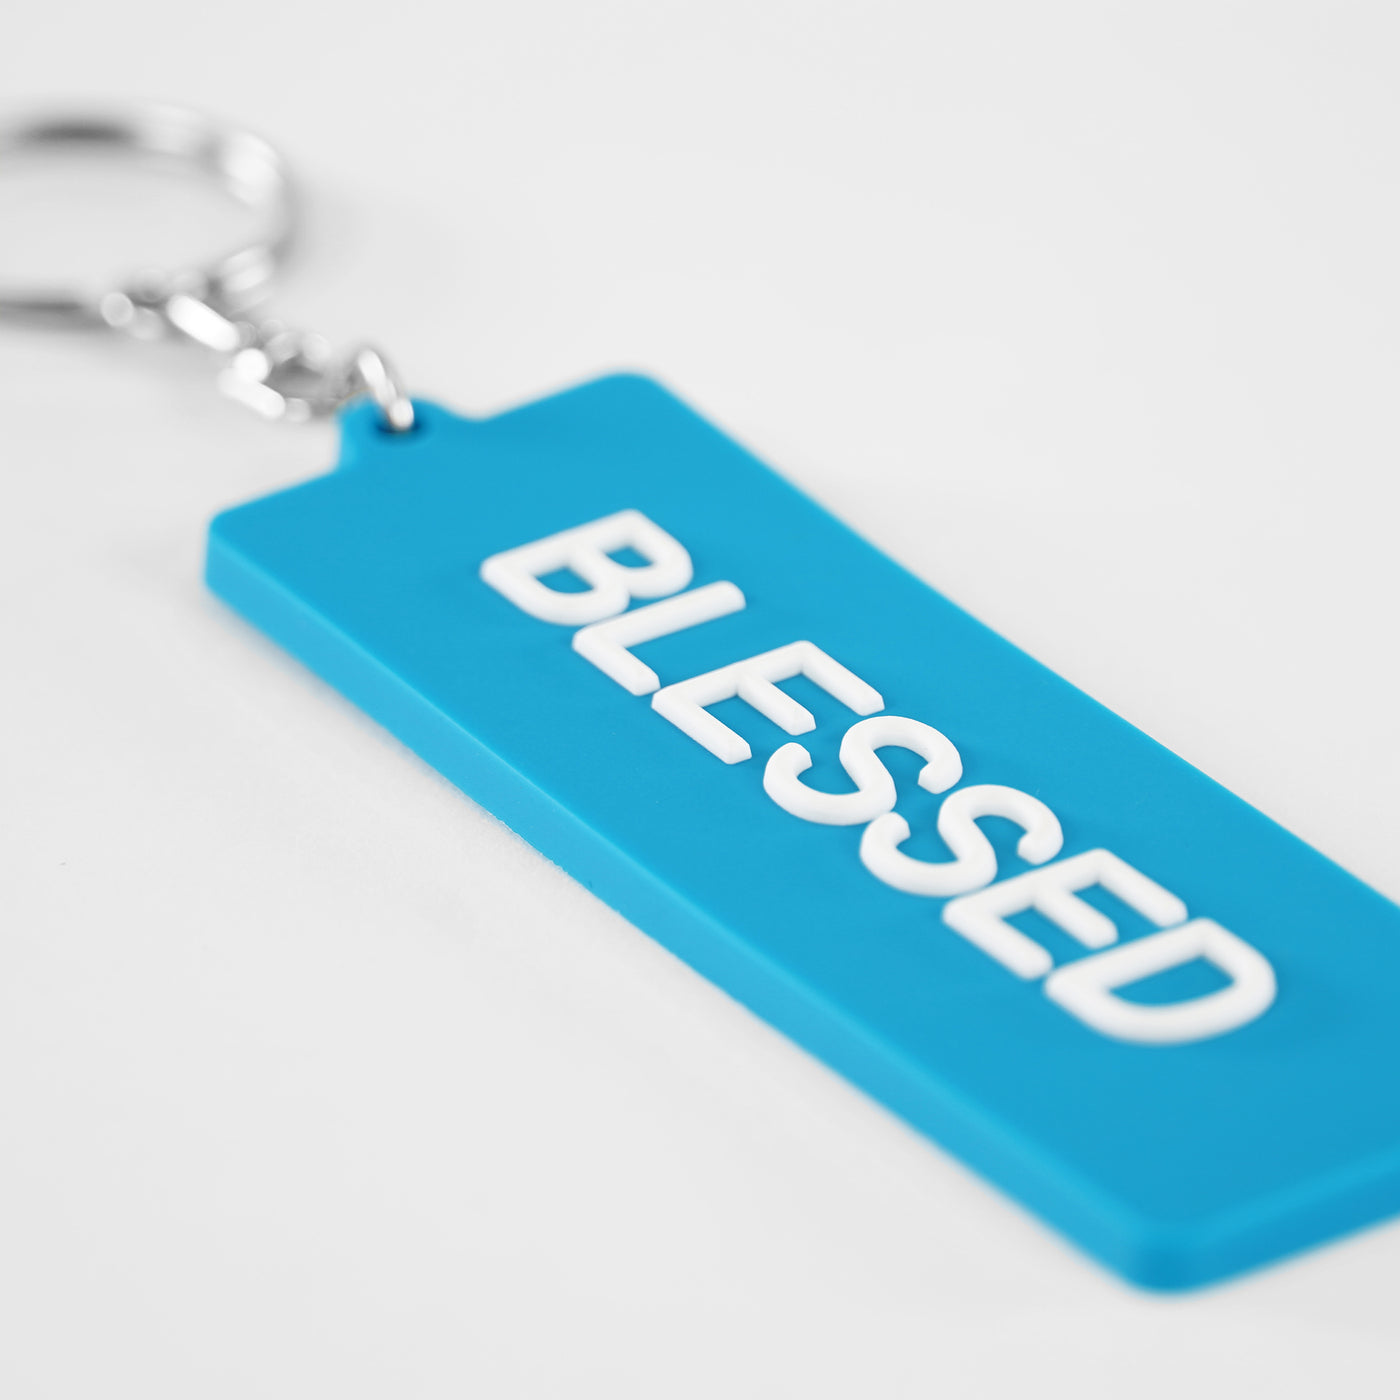 Blessed Keychain